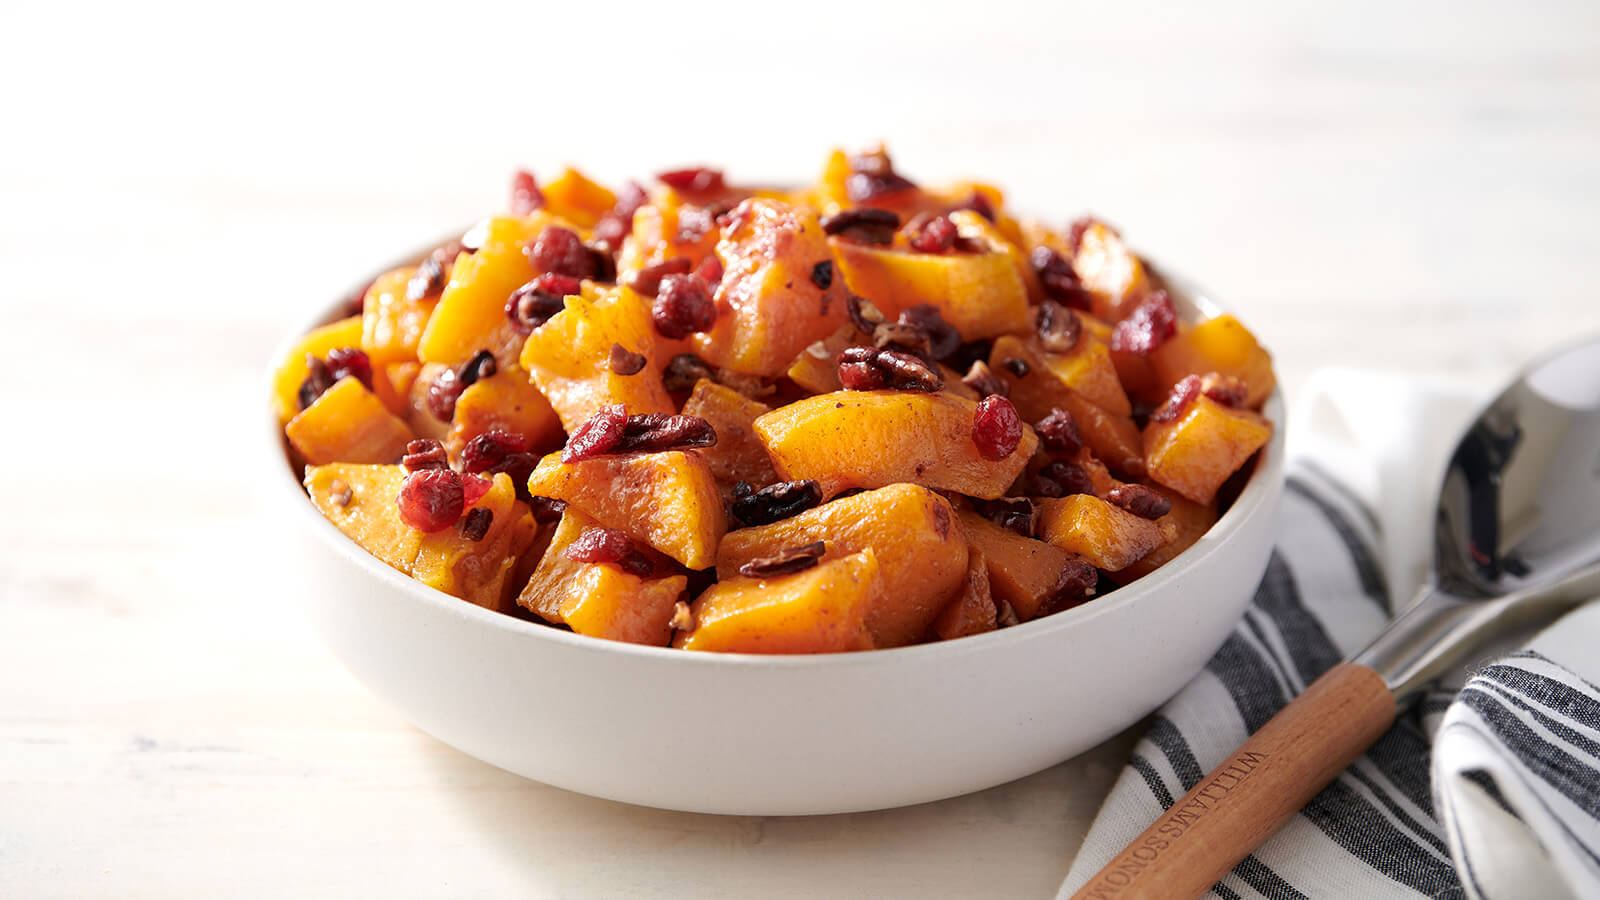 Roasted Butternut Squash with Pecans and Cranberries